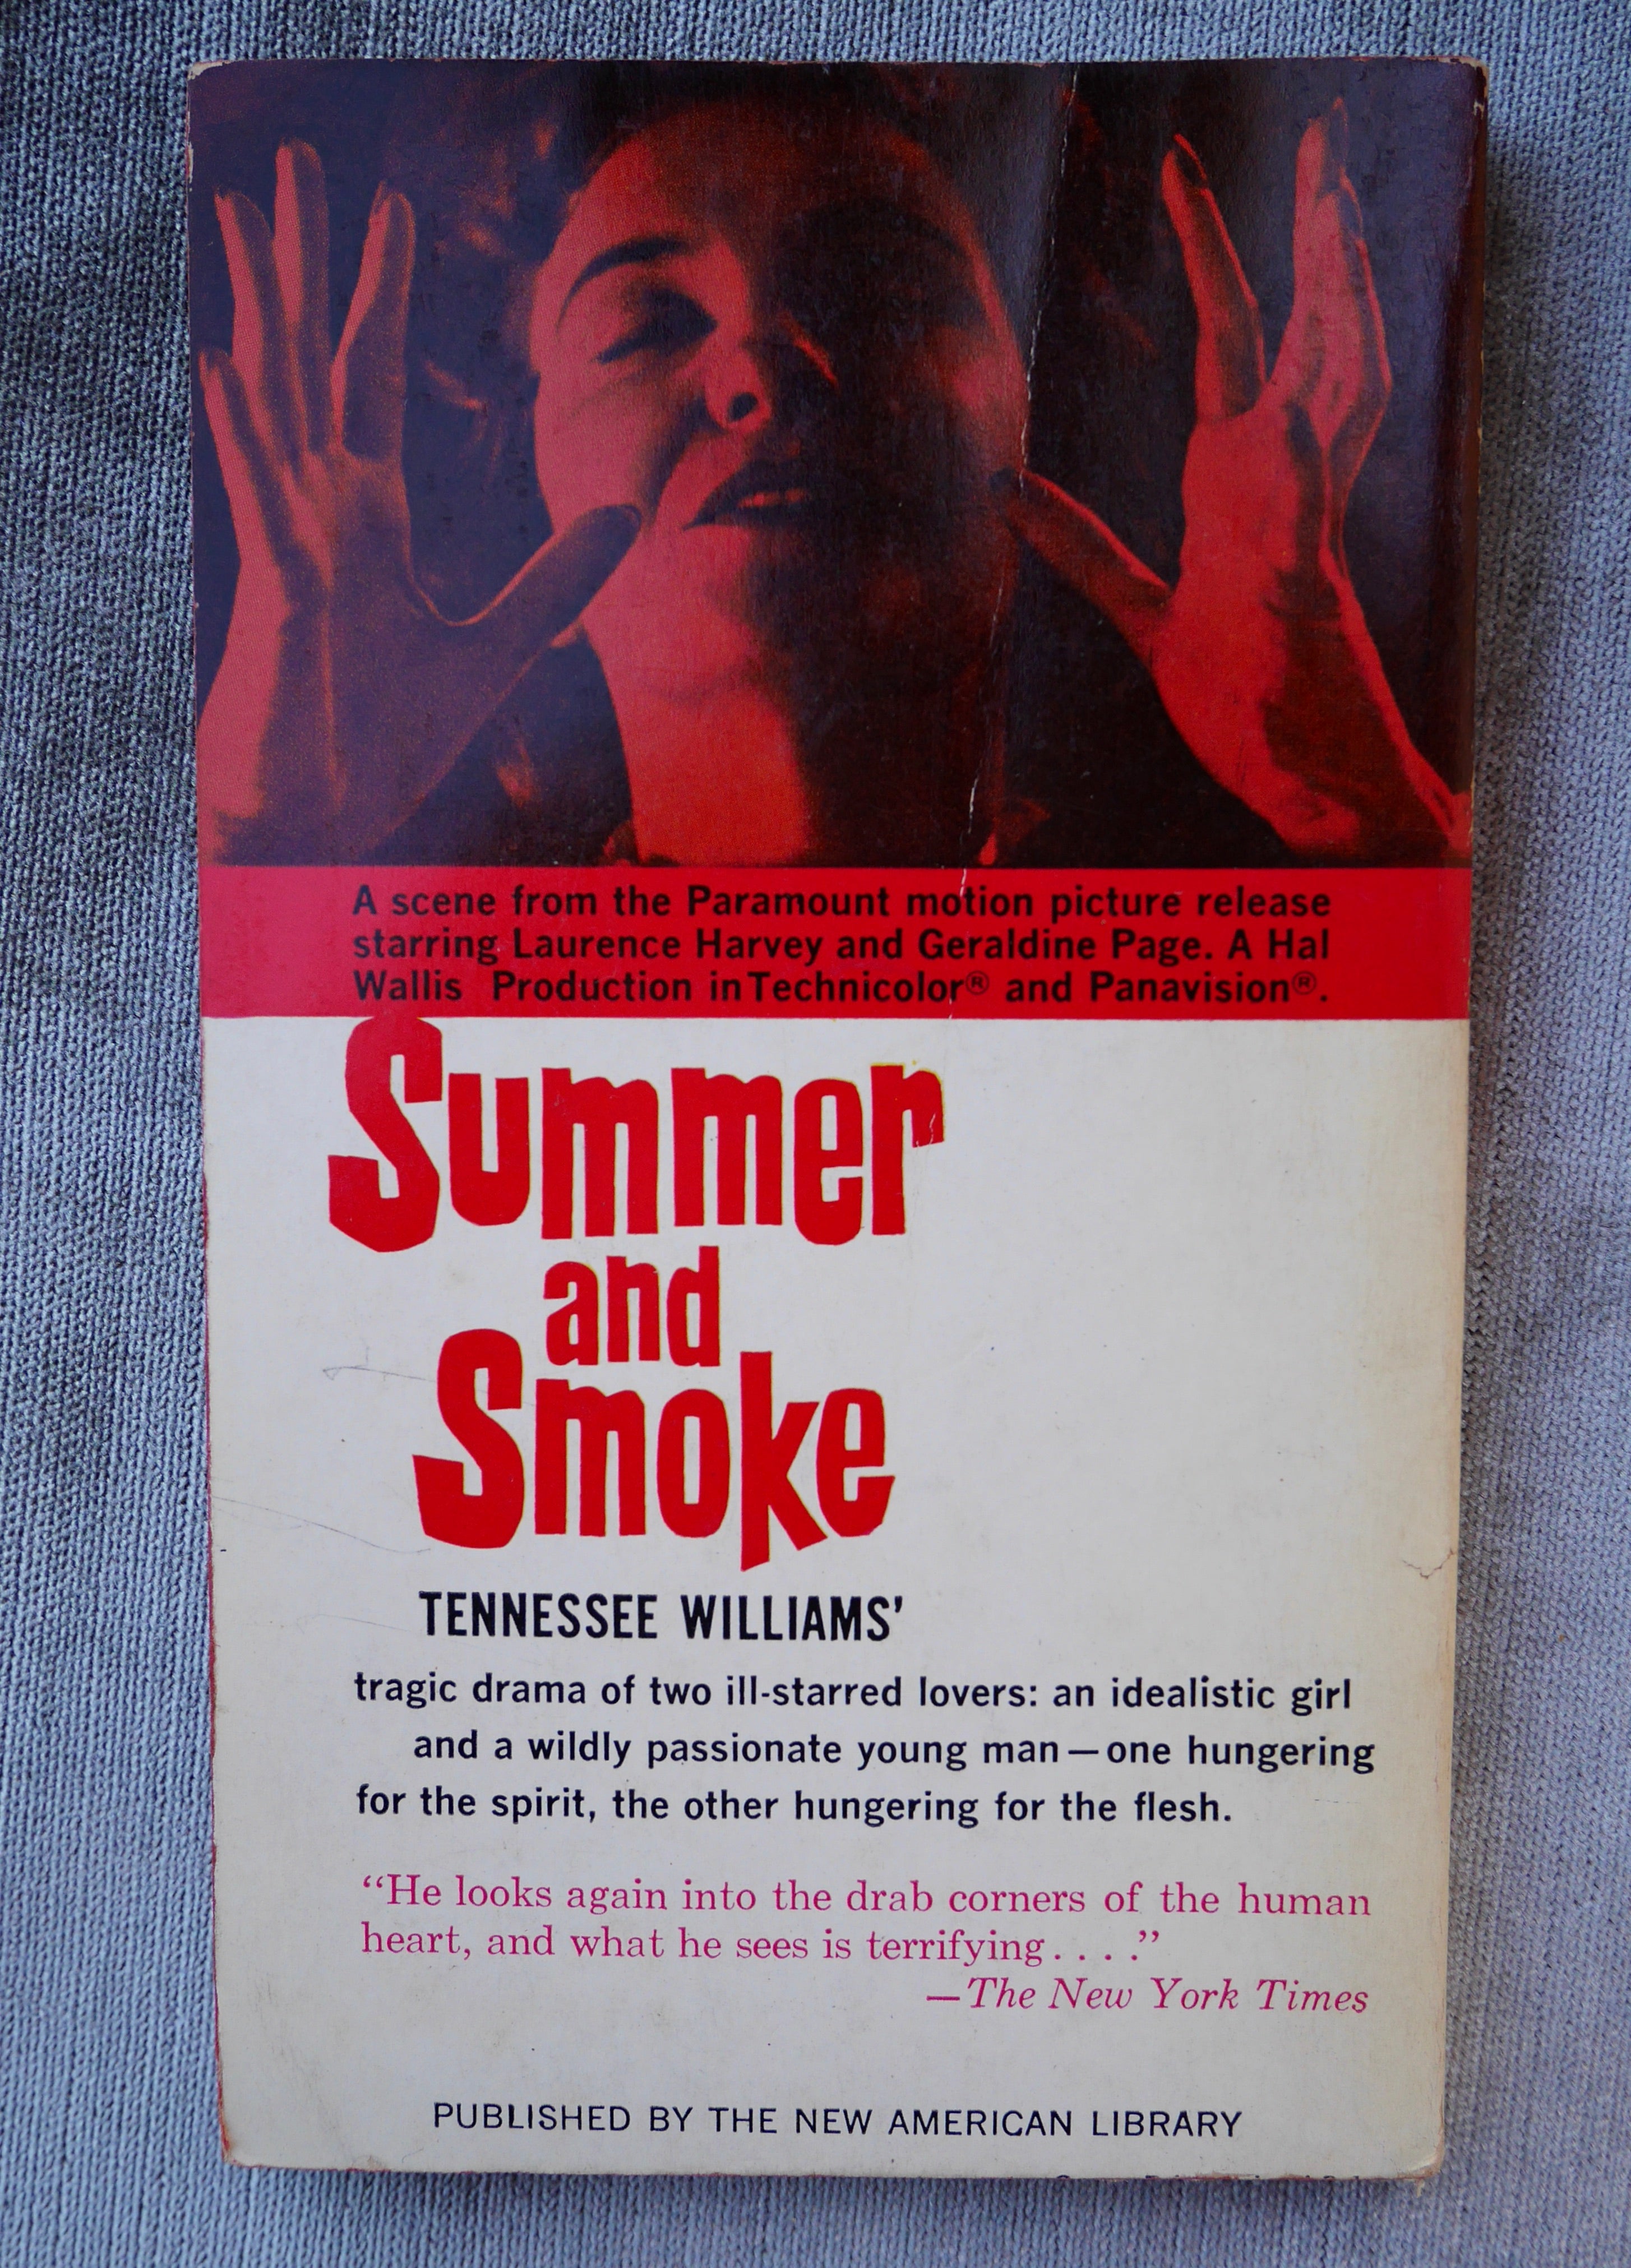 Tennessee Williams, Summer and Smoke, Signet, 1961, Movie Tie-In Paperback